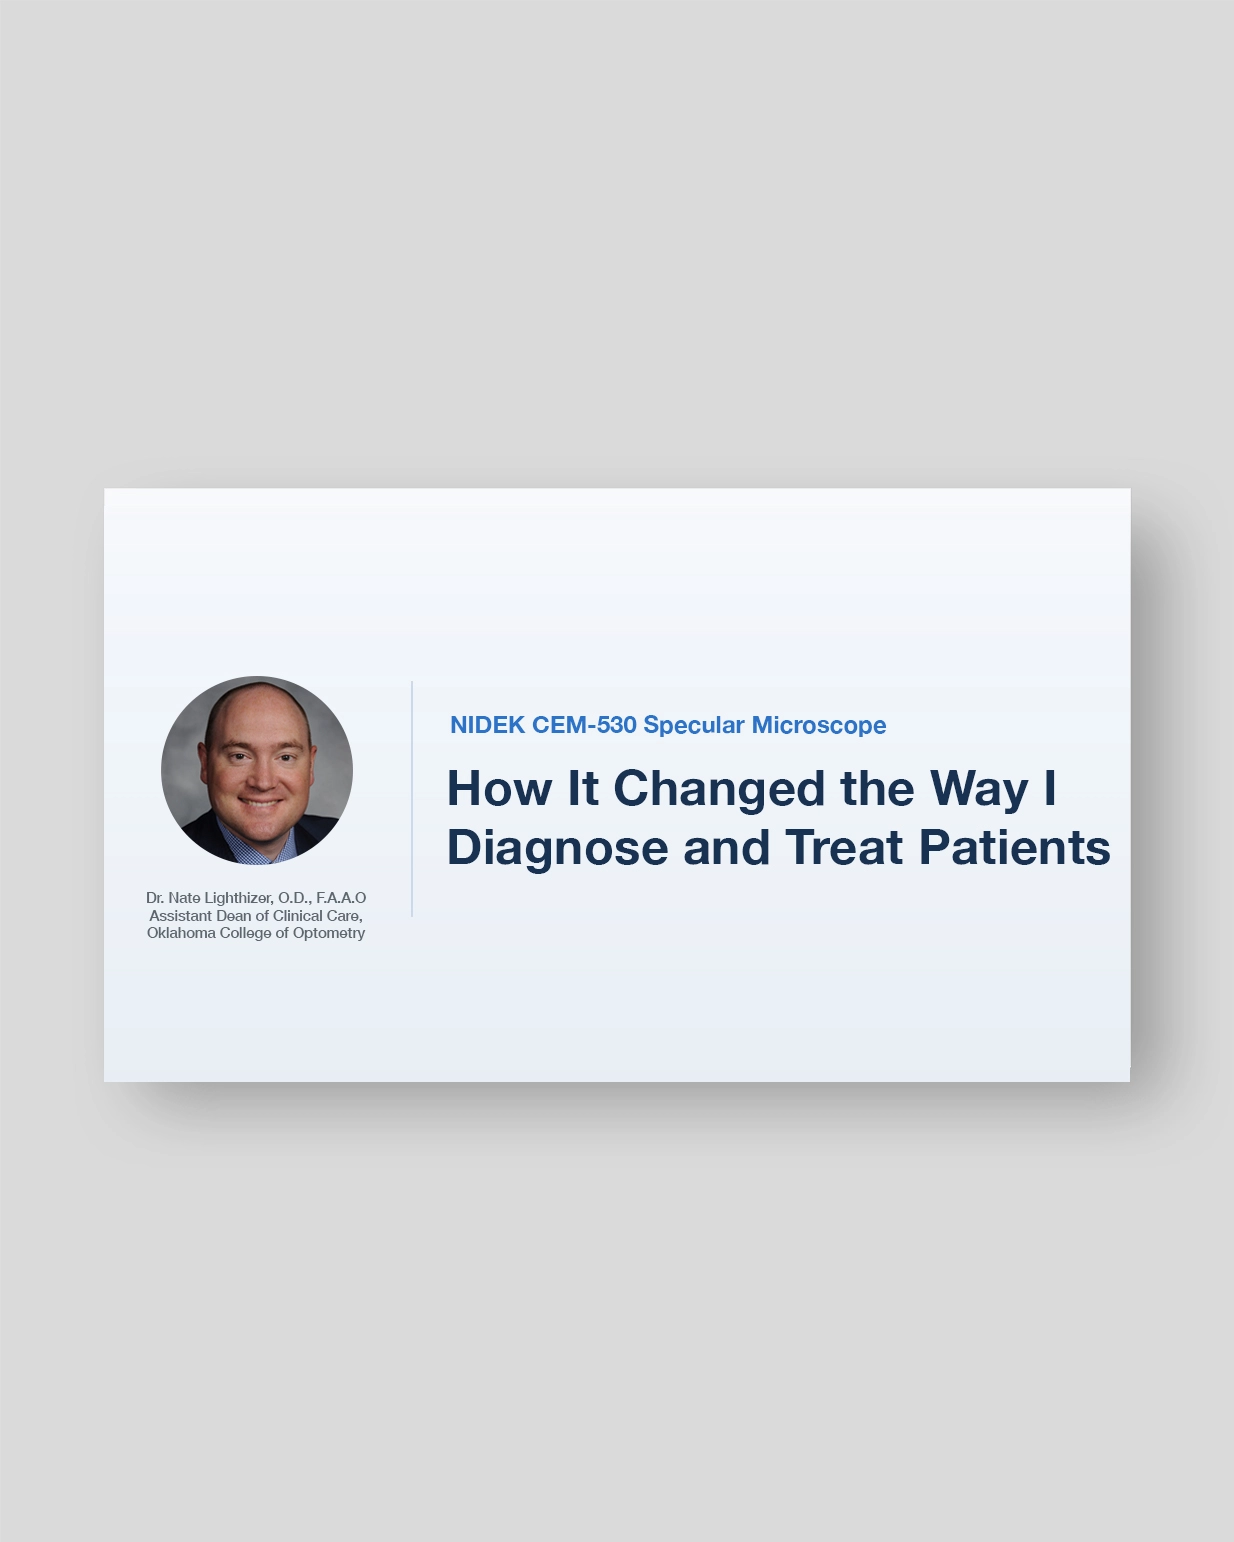 How the CEM-530 Impact Patient Diagnosis and Treatment